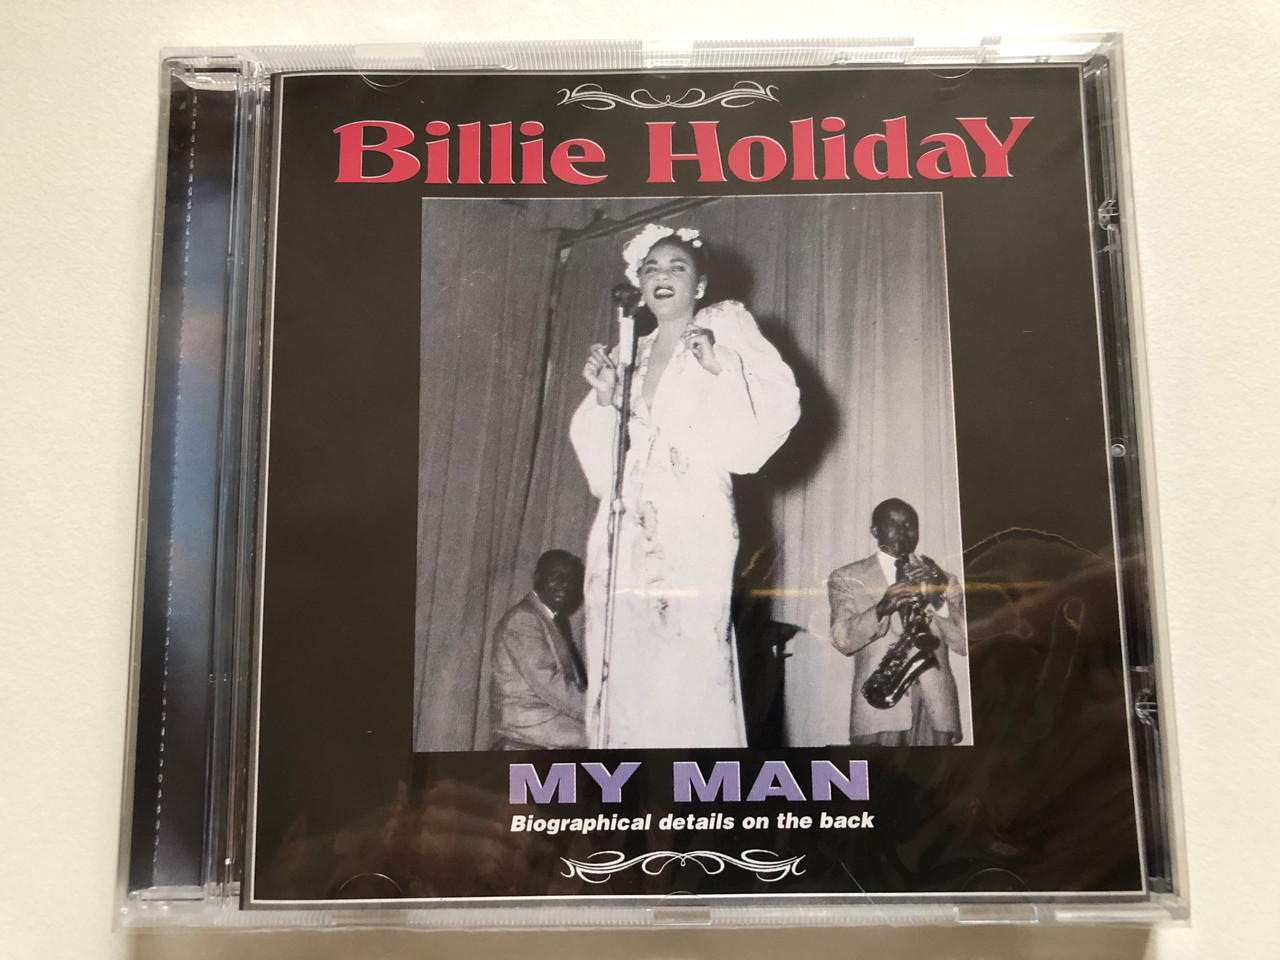 https://cdn10.bigcommerce.com/s-62bdpkt7pb/products/0/images/311273/Billie_Holiday_My_Man_Biographical_details_on_the_back_Success_Audio_CD_16009CD_1__79300.1699547621.1280.1280.JPG?c=2